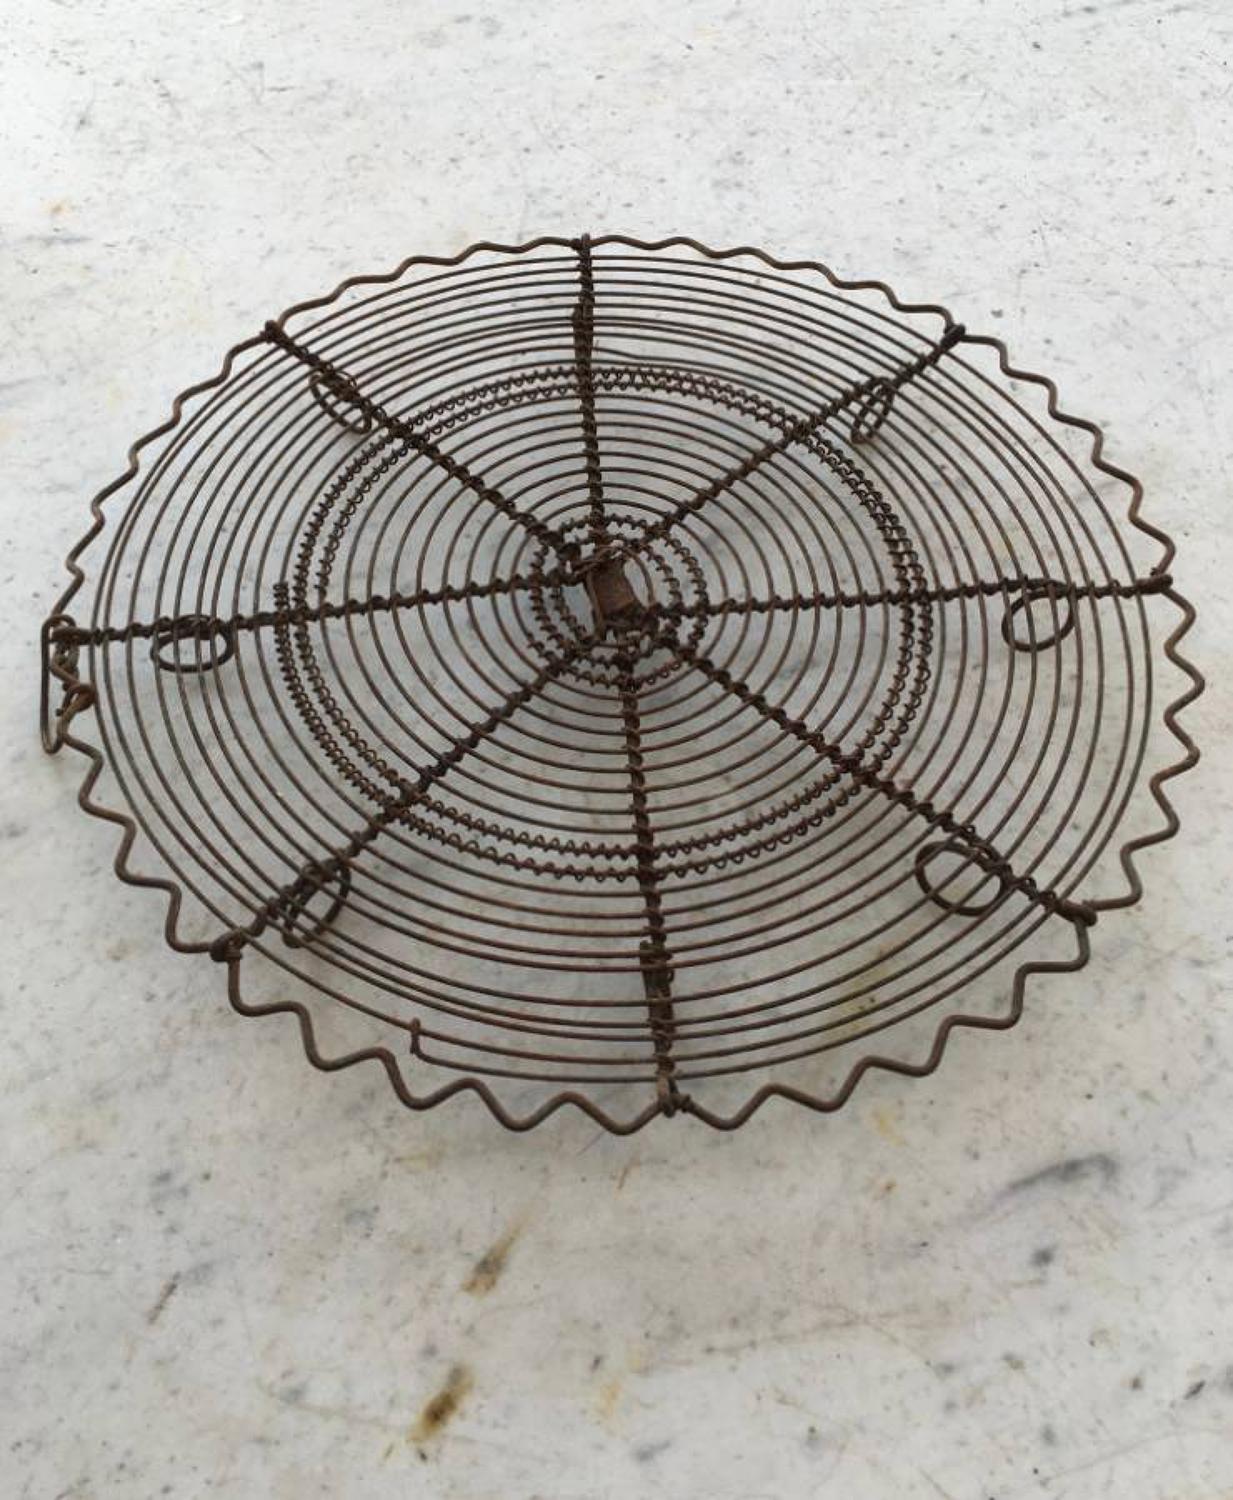 Rare Victorian Ornate Wire Work Cake Cooling Rack